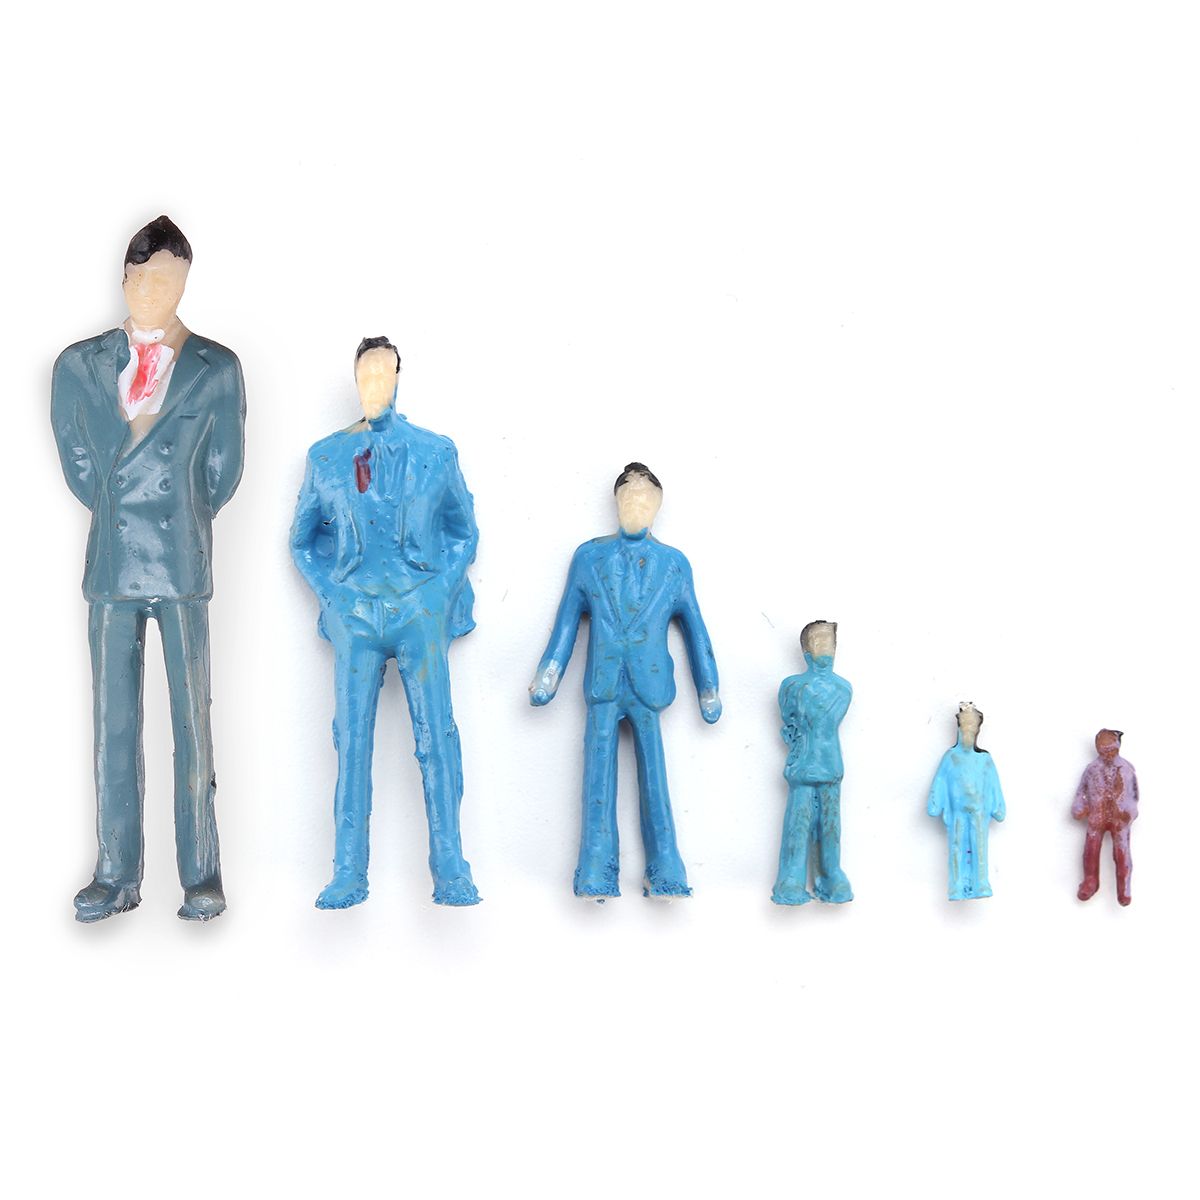 50Pcs-6-Sizes-Painted-Model-People-Figure-Seated-Passenger-Kids-Toys-Gift-1666246